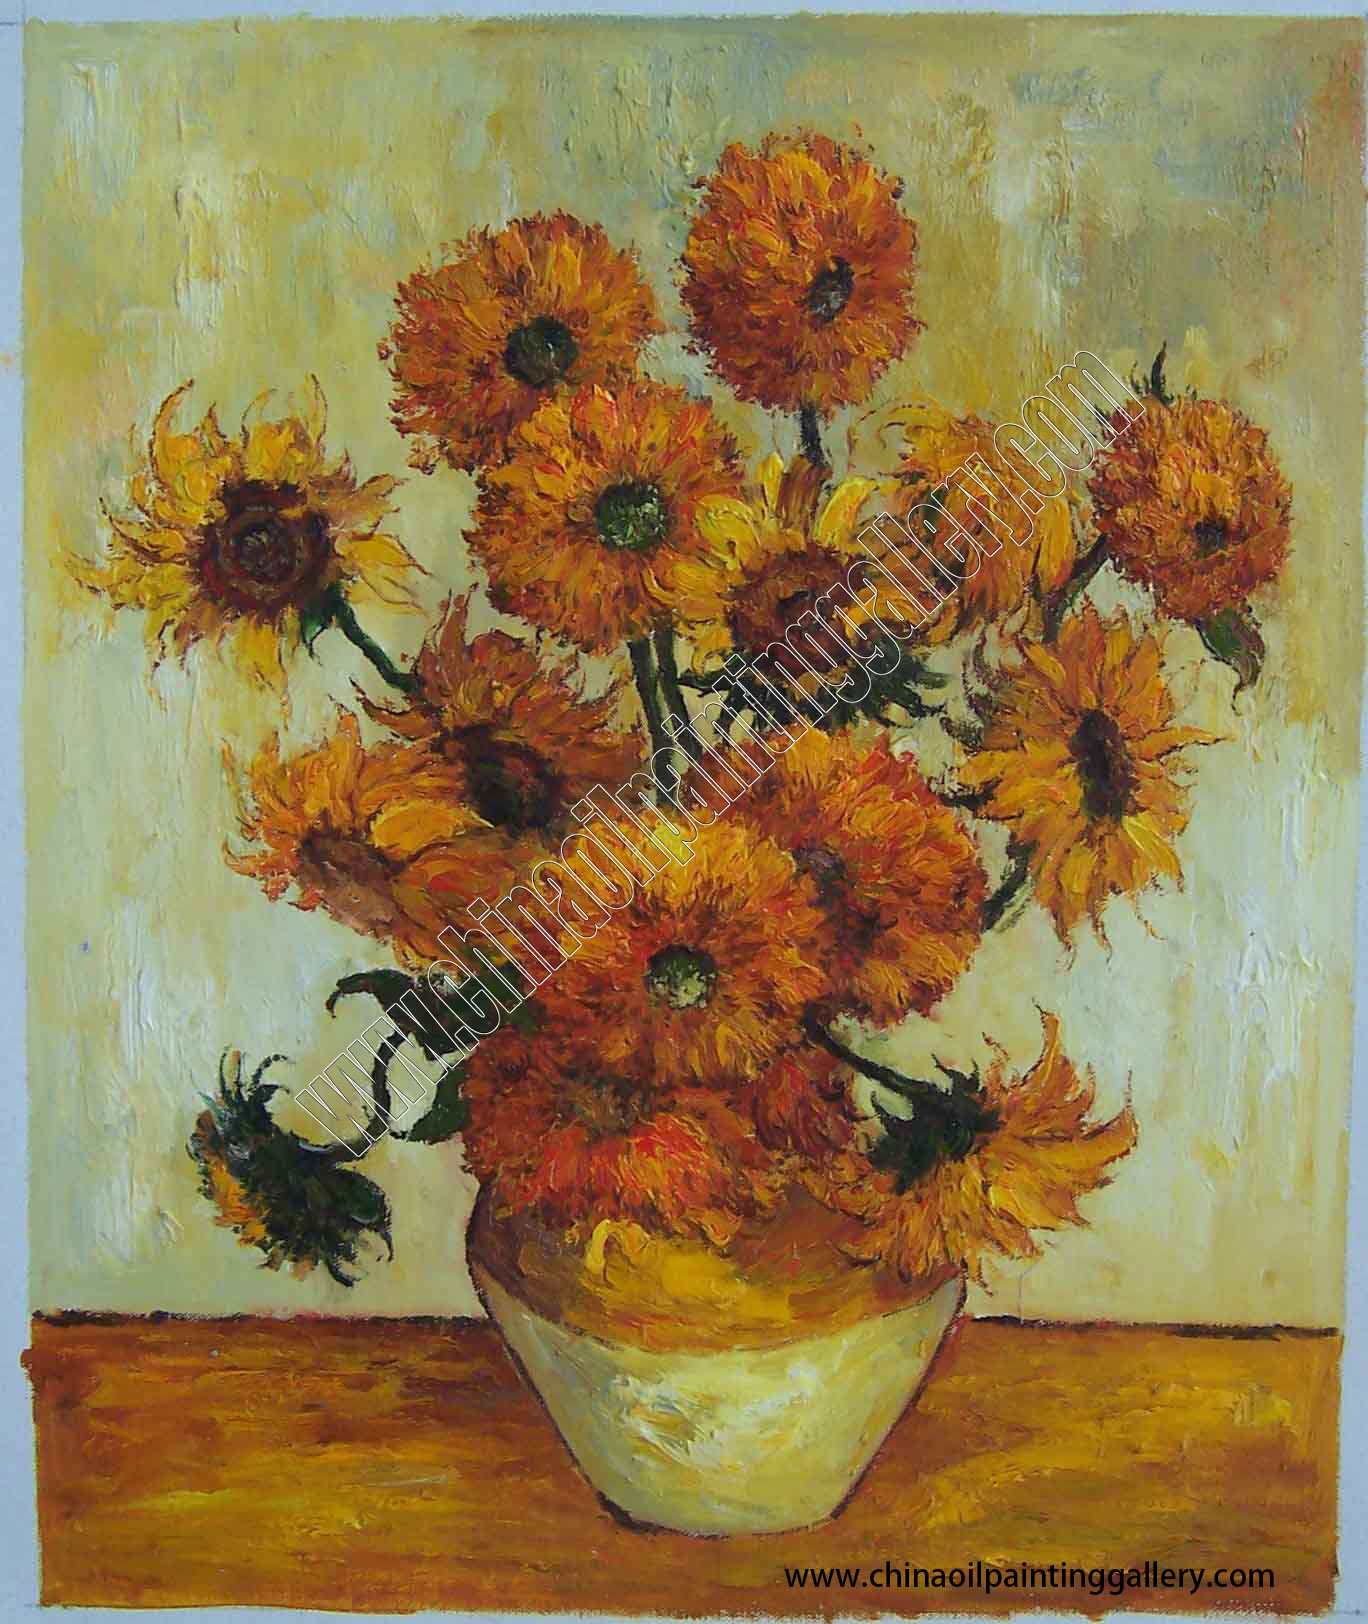 Vincent van Gogh Sunflowers - Oil painting reproductions 12